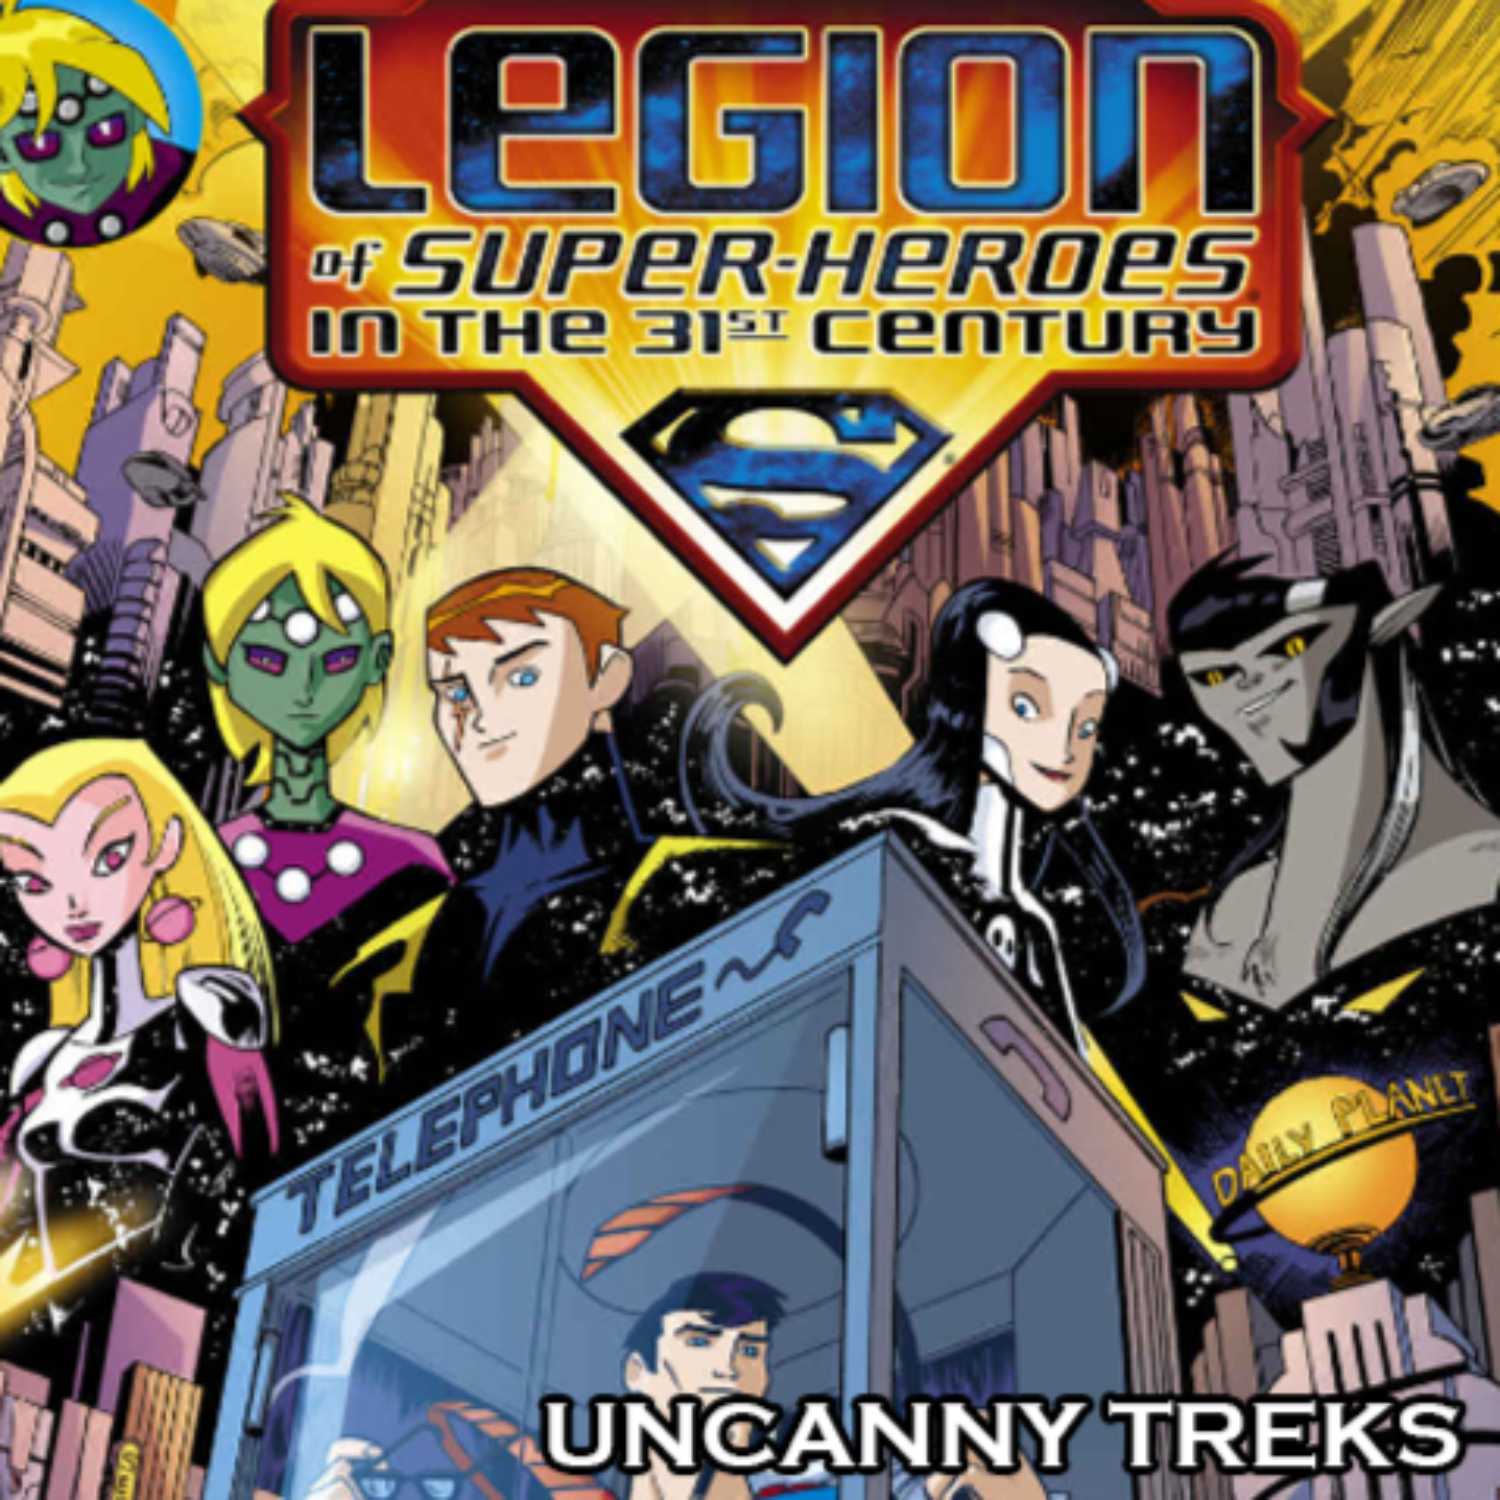 Uncanny Treks: Legion of Super Heroes in the 31st Century Issues #7-16